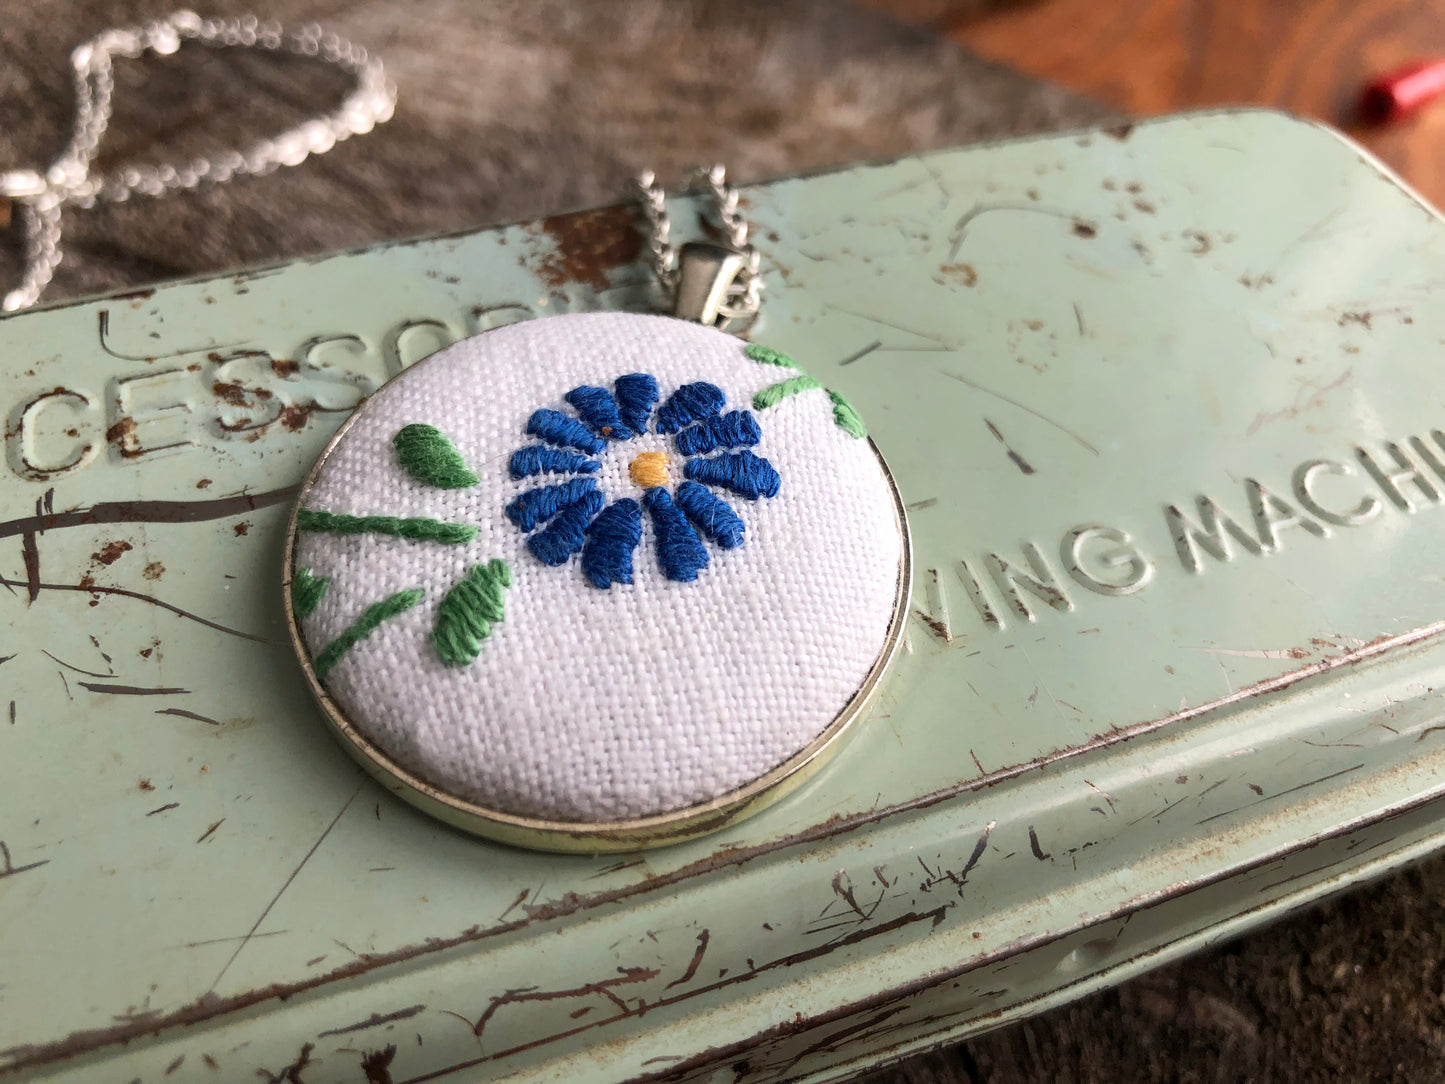 Blue flower embroidered pendant necklace